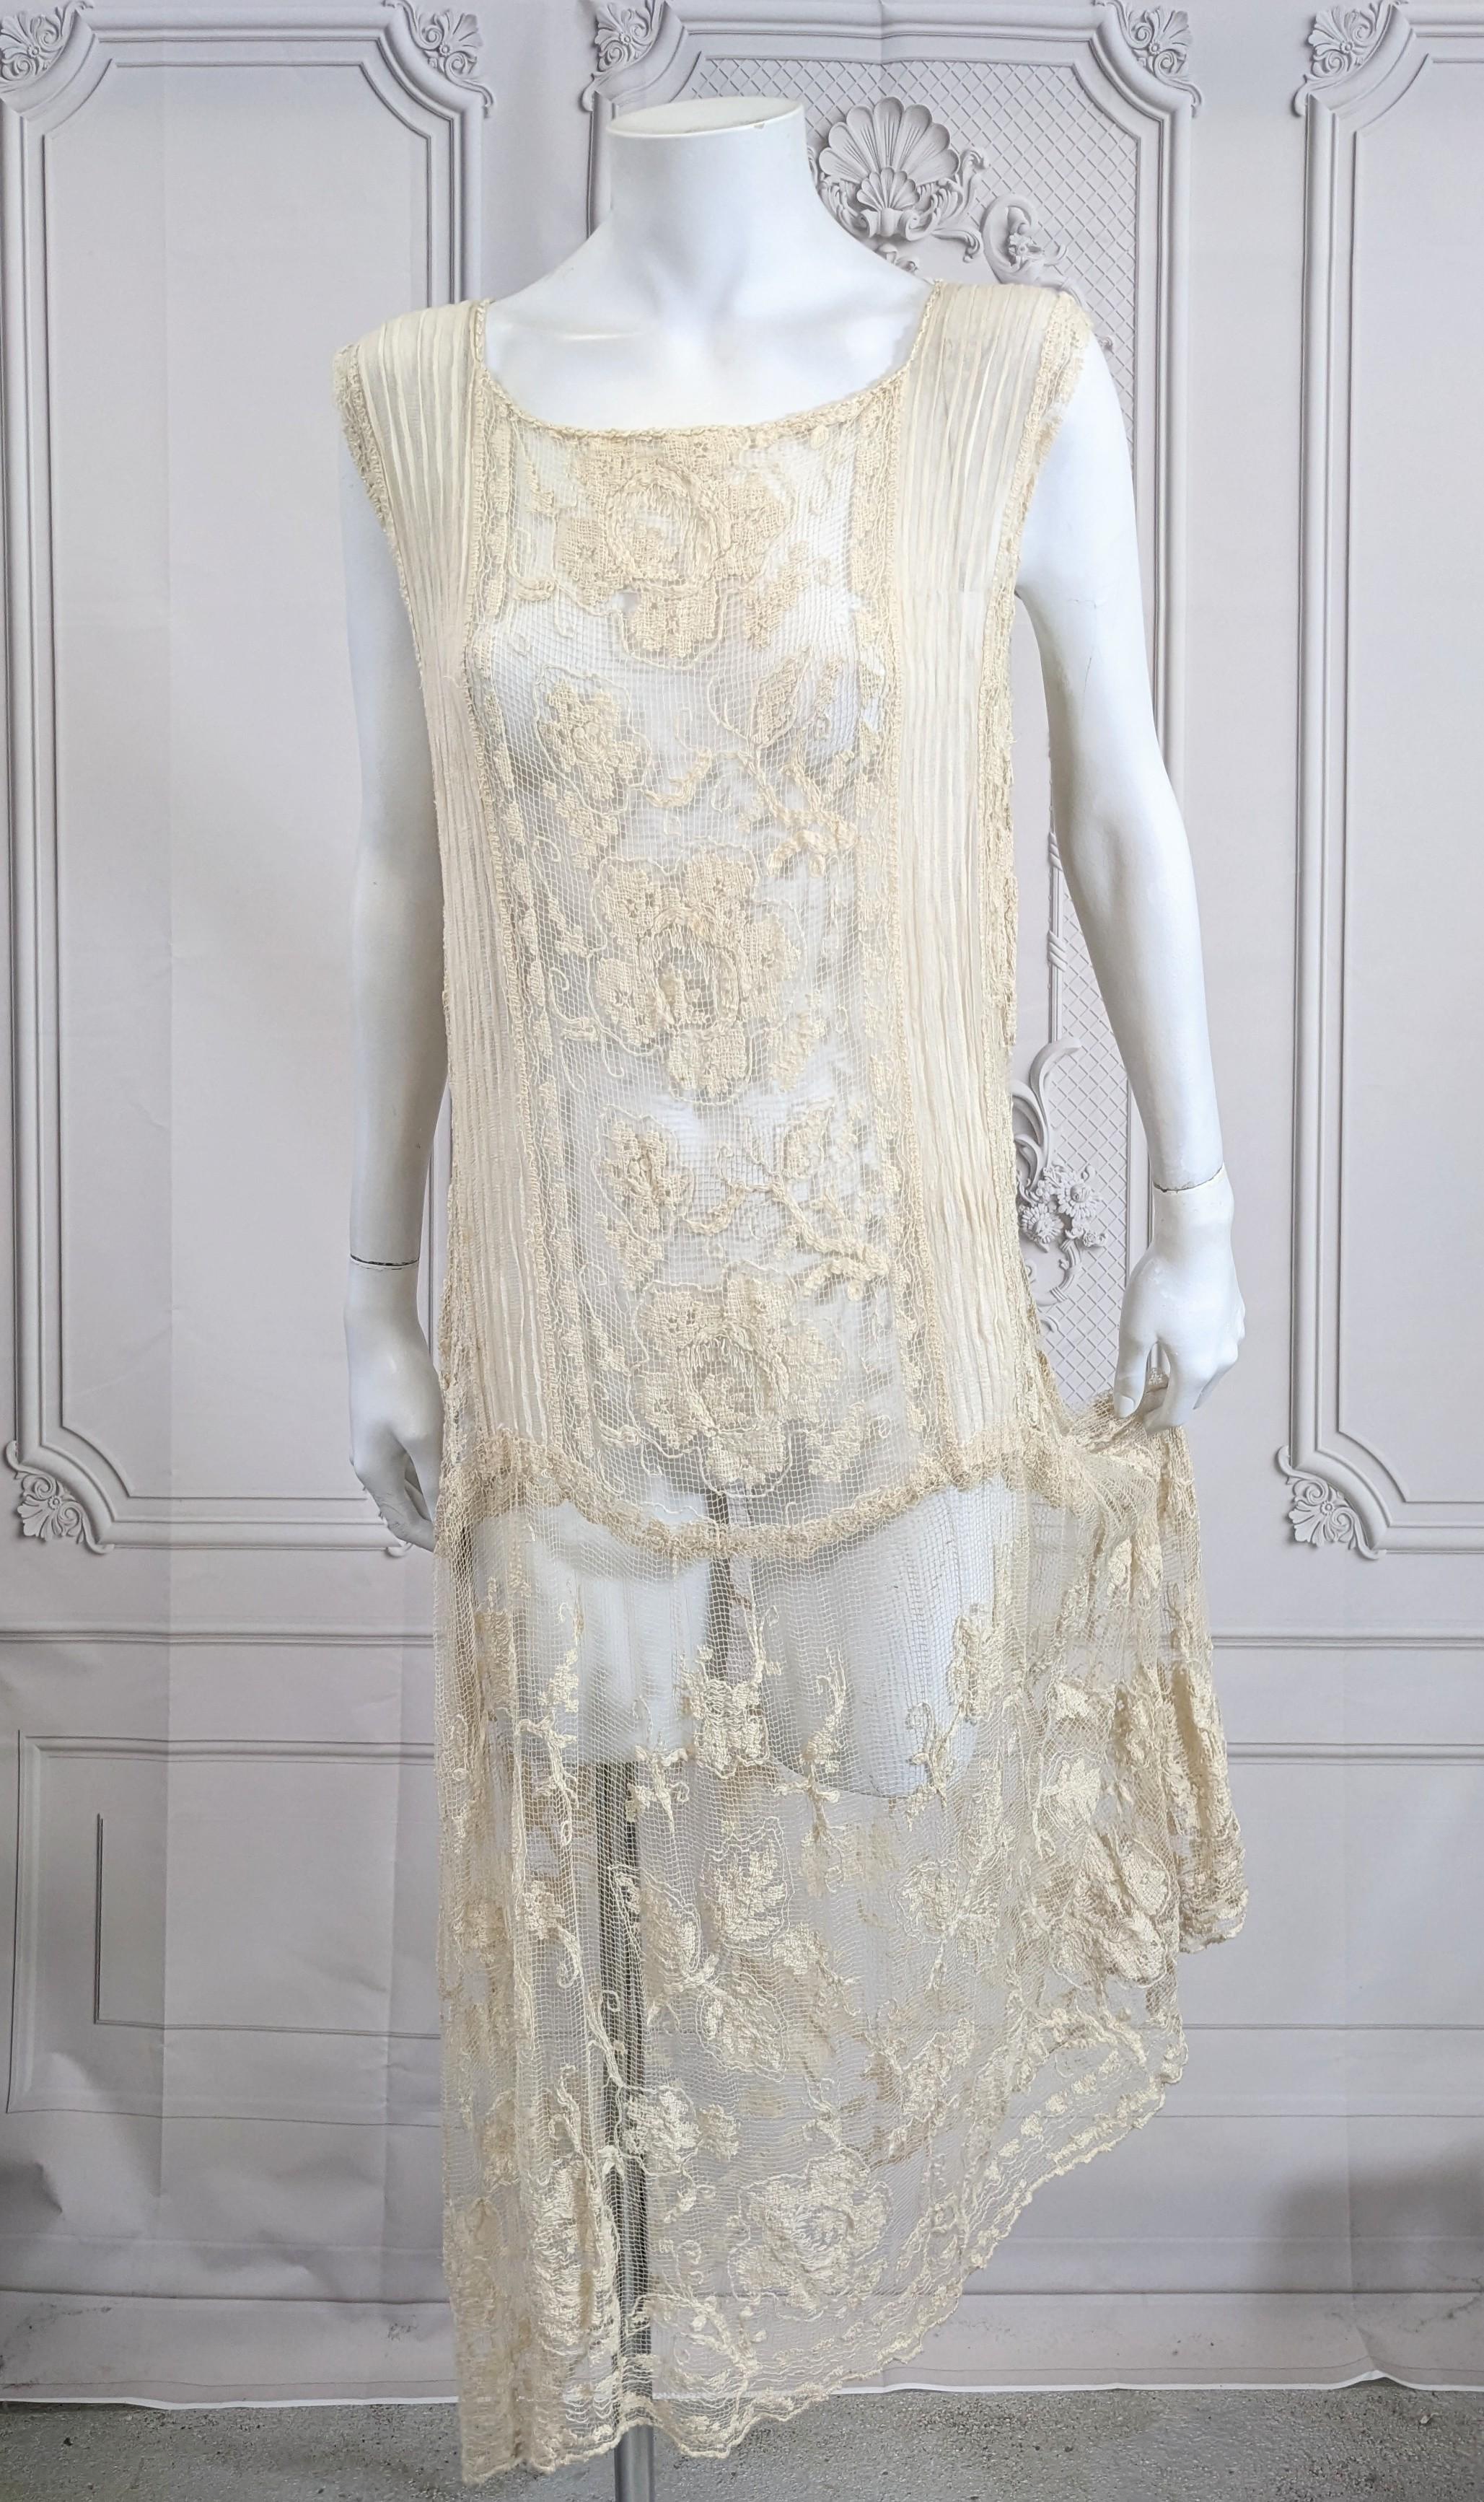 Women's 1920's Filet Lace and Chiffon Dress For Sale